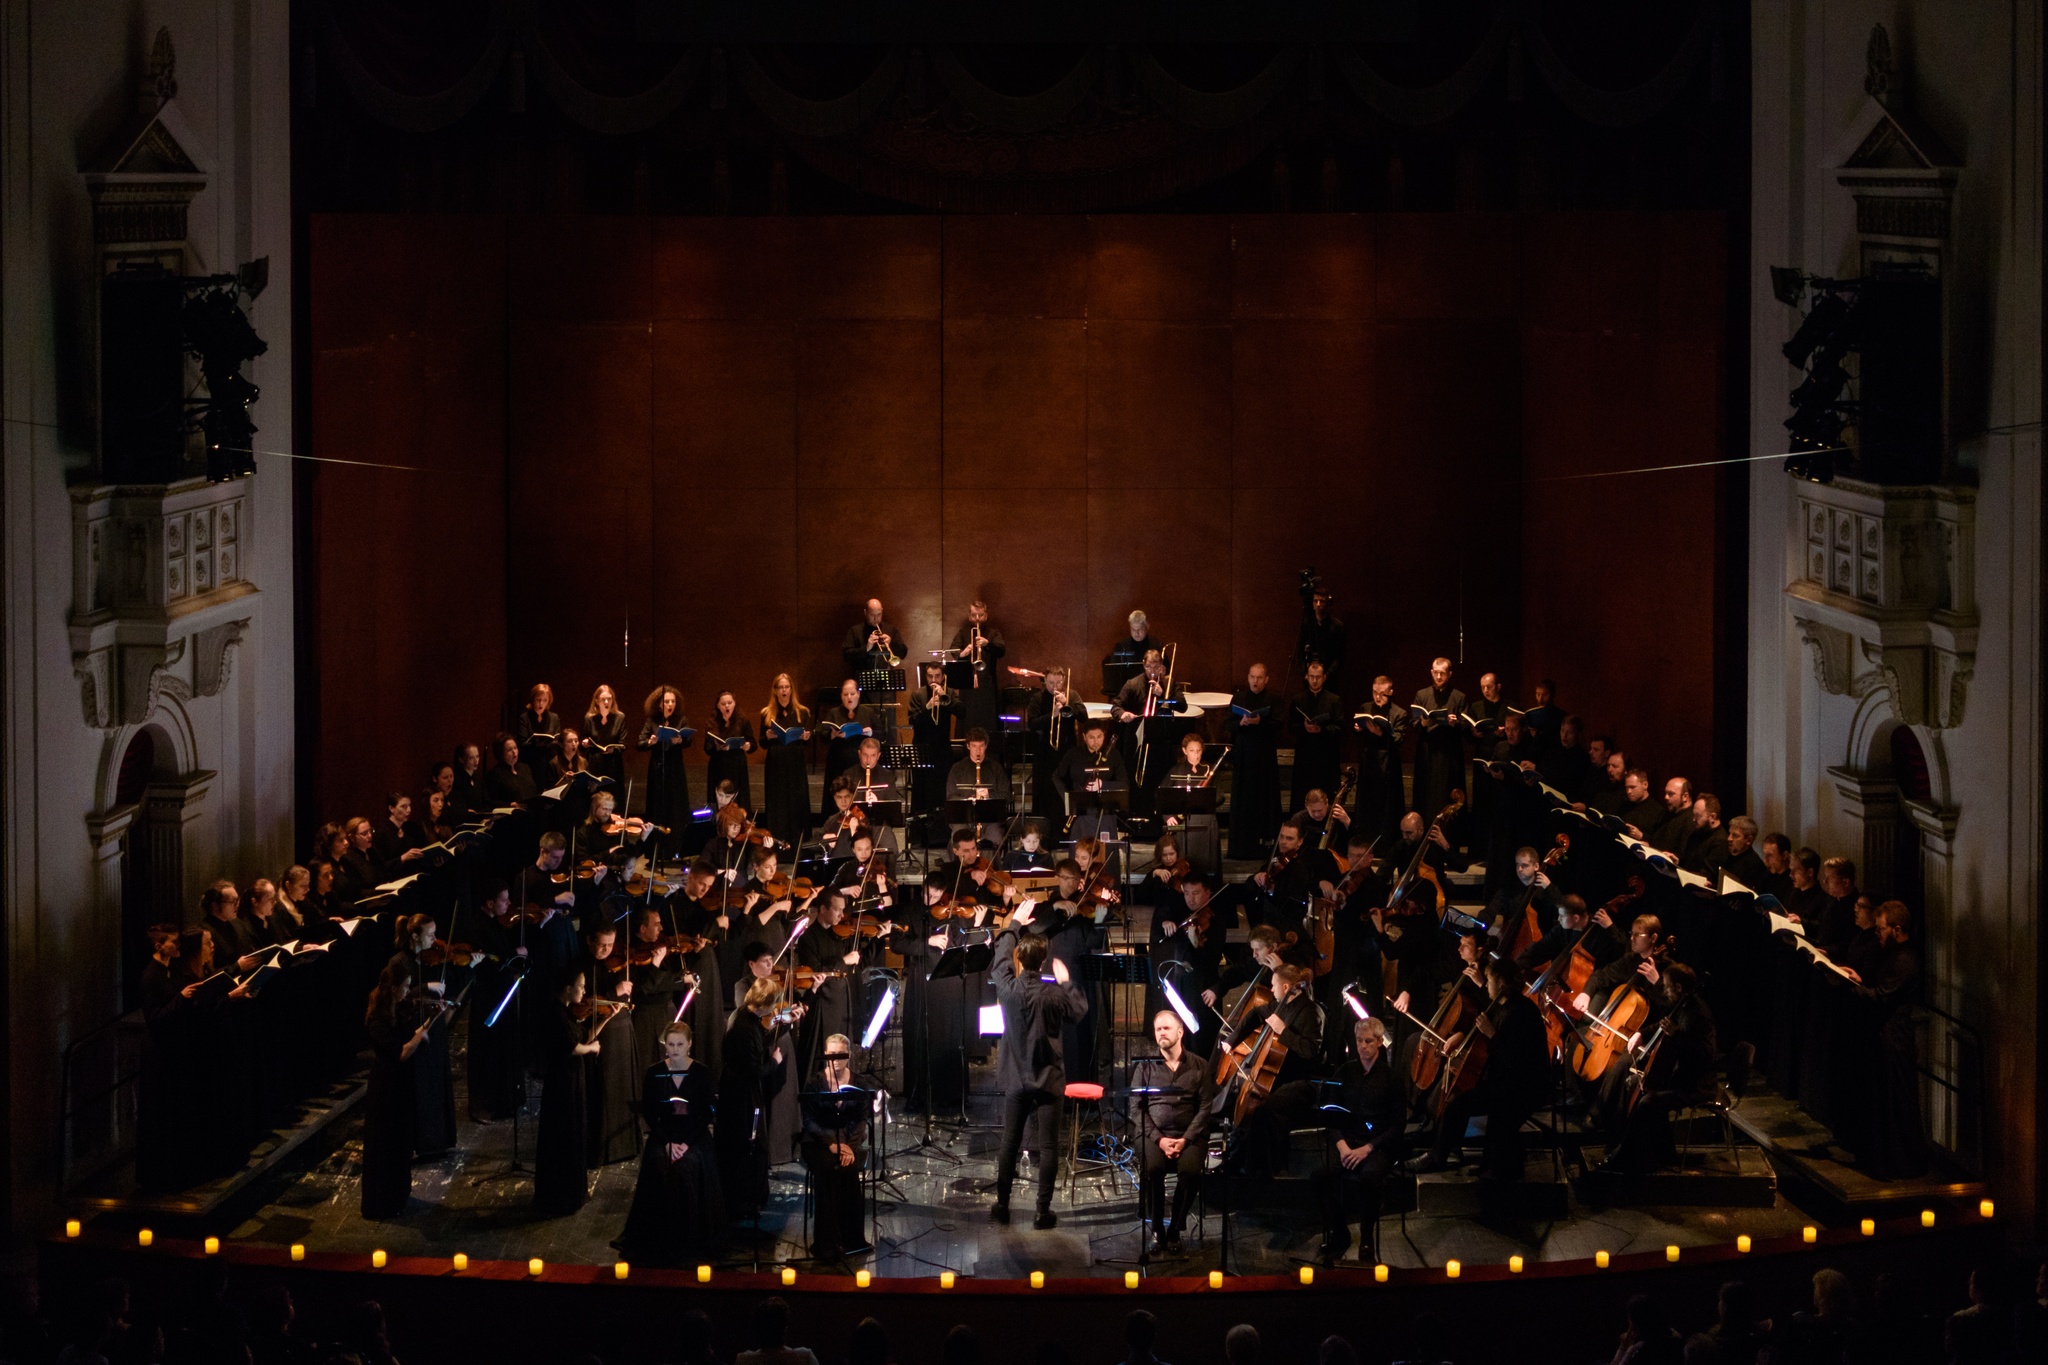 A portrait of the musicAeterna orchestra and choir performing on stage